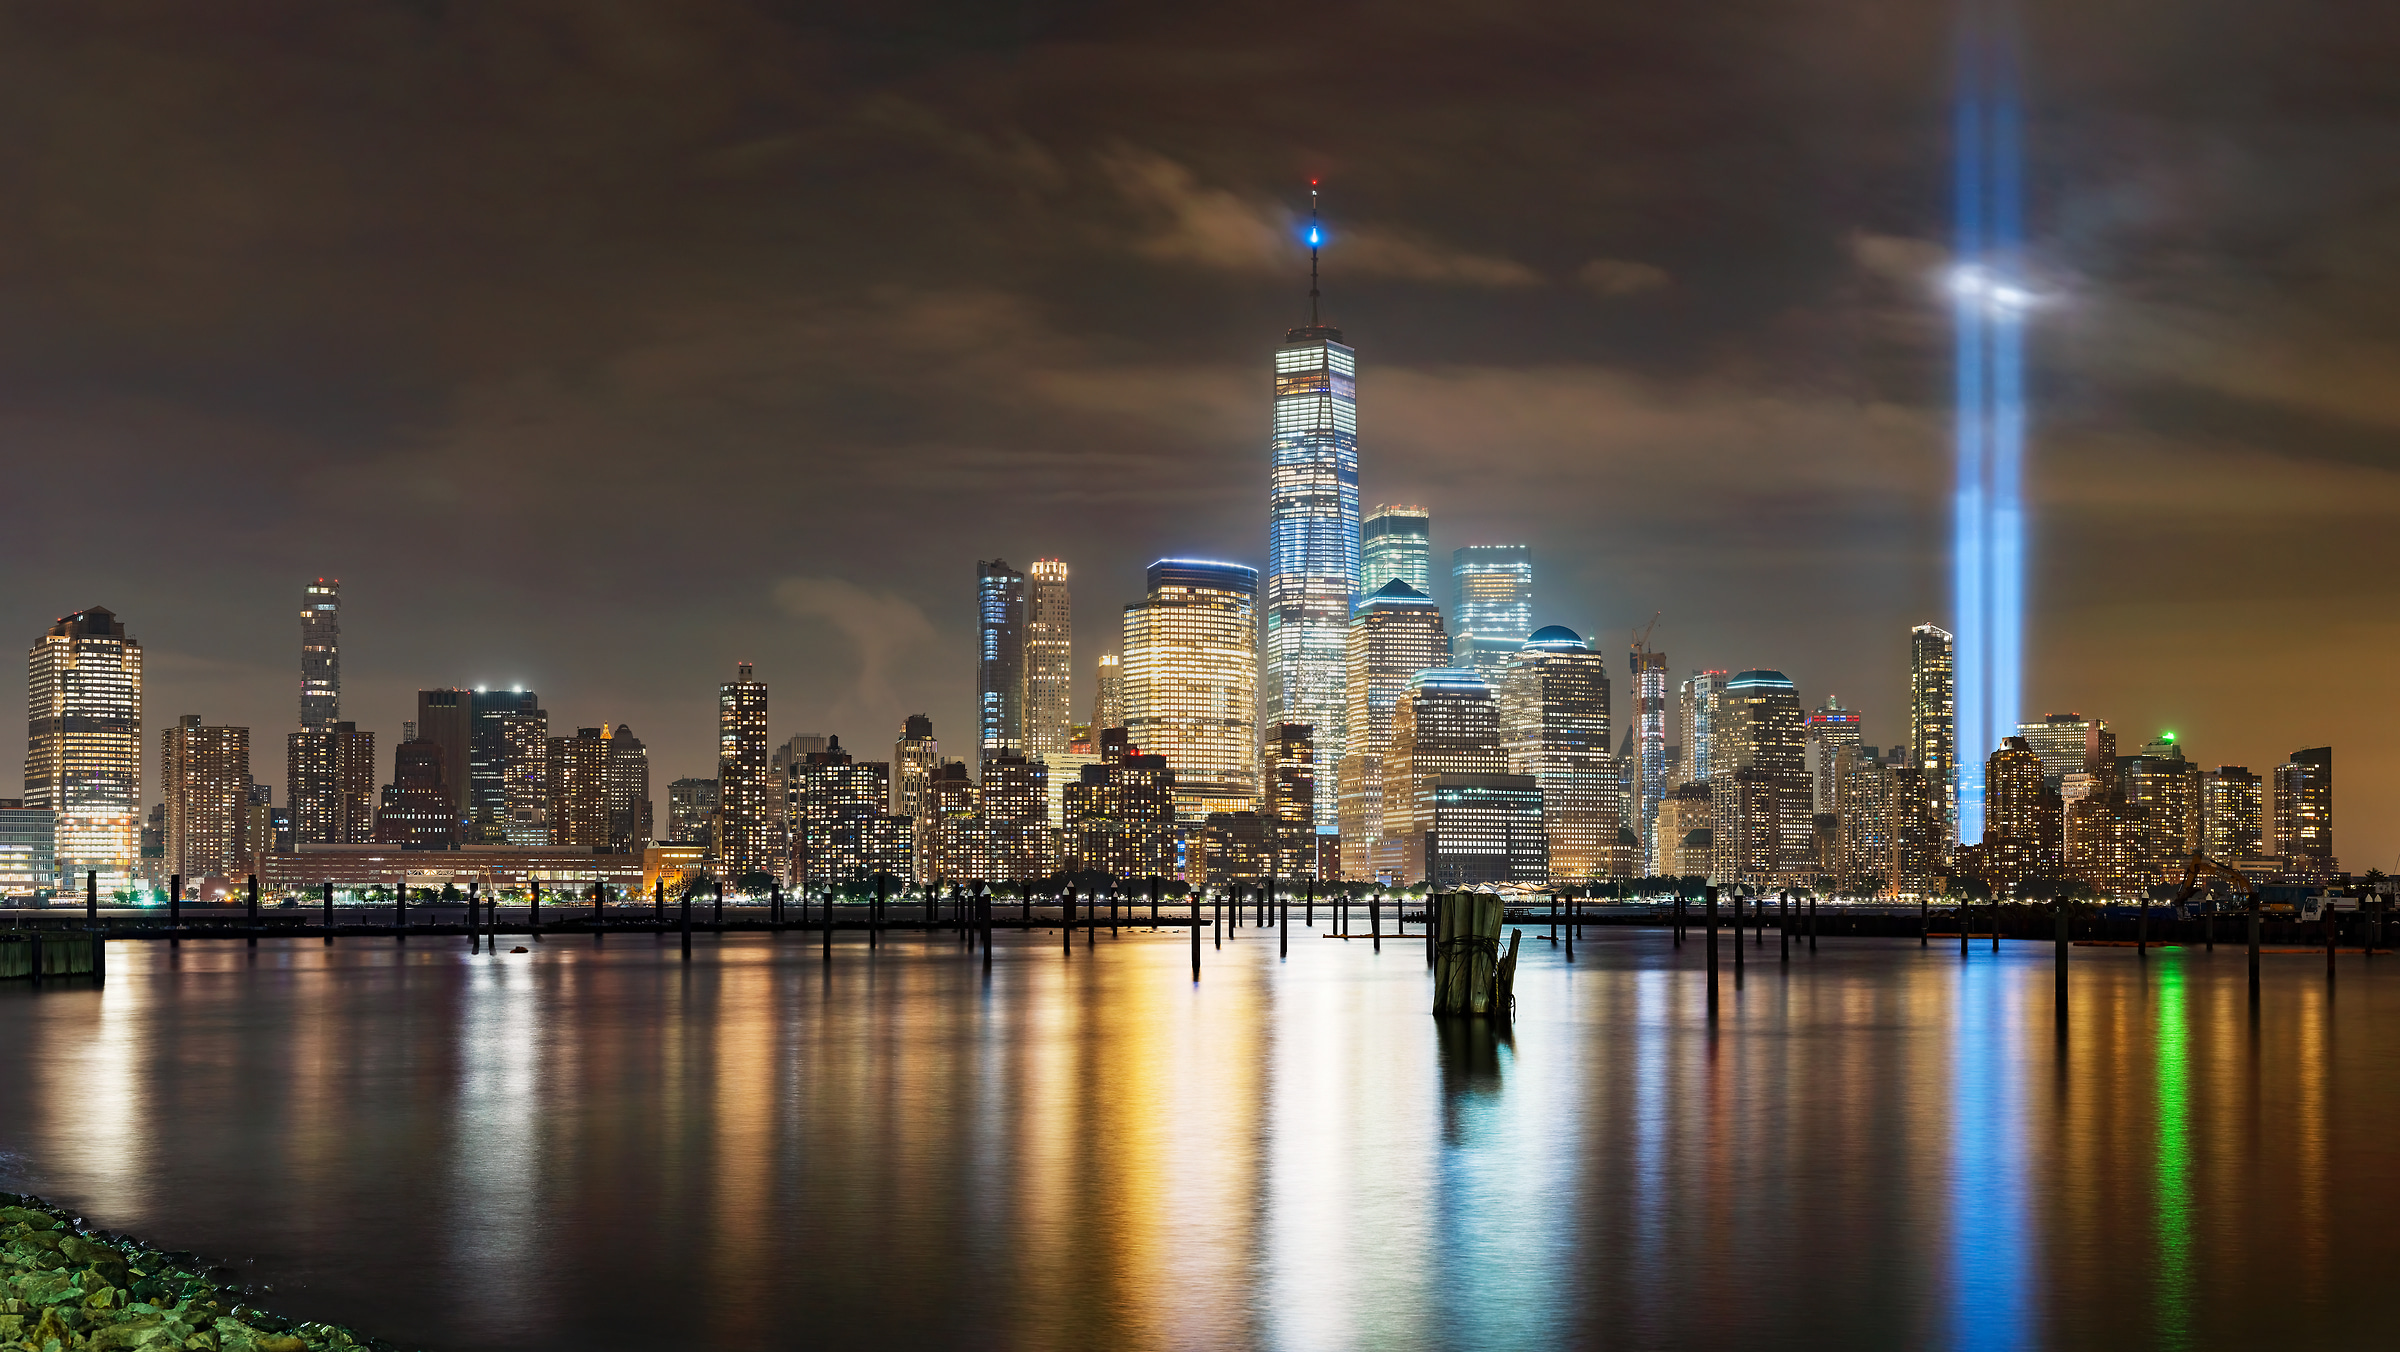 367 megapixels! A very high resolution, large-format VAST photo print of the 9/11 Tribute in Light memorial and the downtown Manhattan skyline at night; cityscape photograph created by Beyti Barbaros in Downtown Manhattan, New York City, New York.